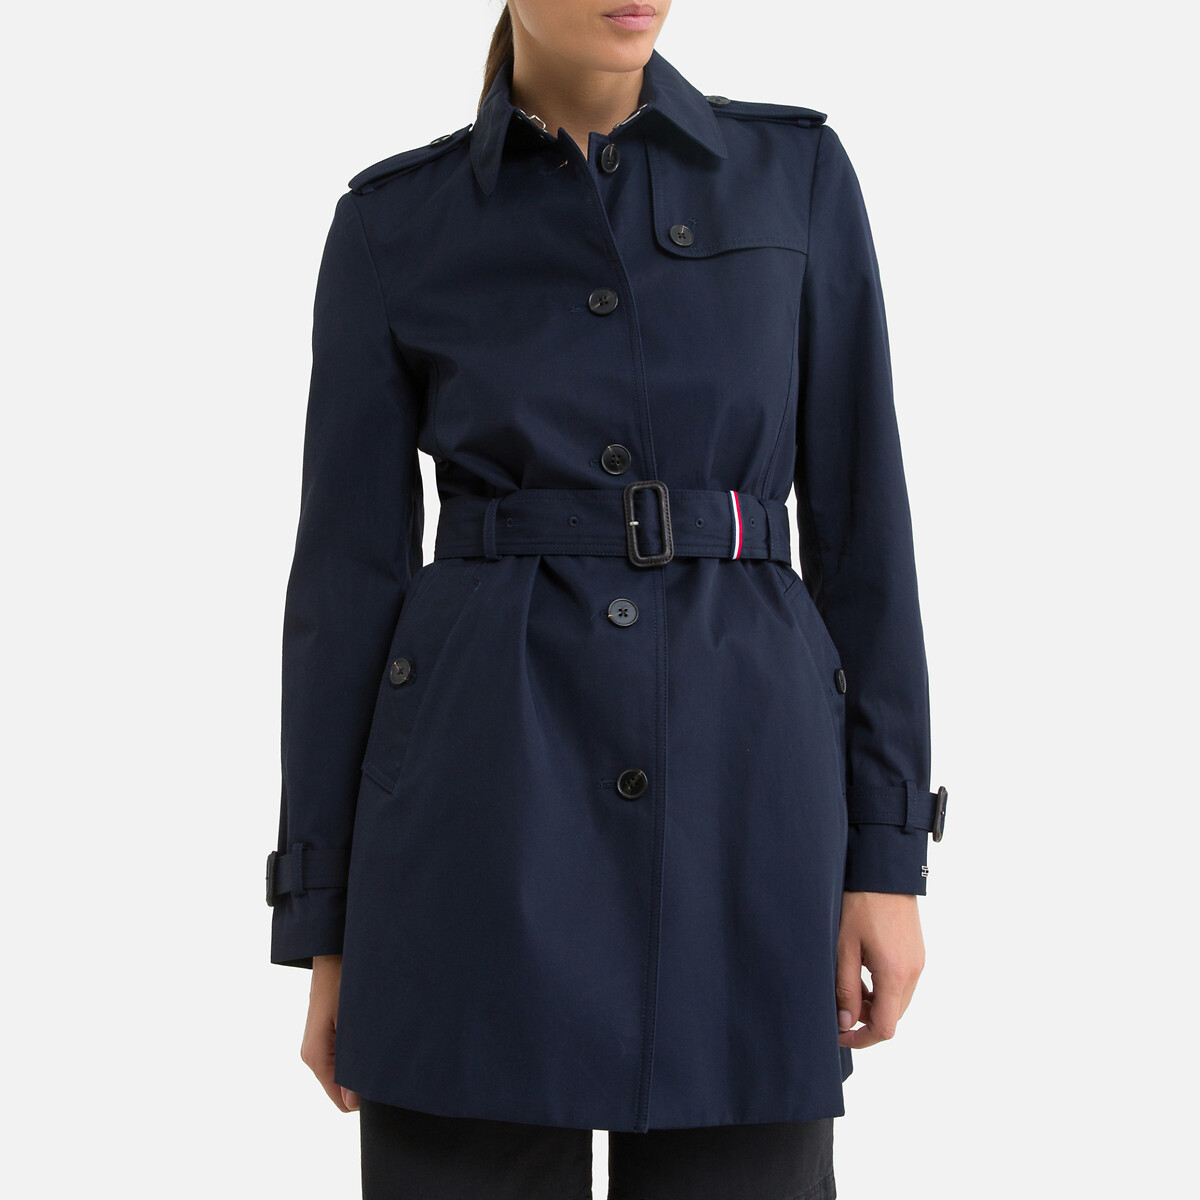 Image of Mid-Length Trench Coat in Cotton with Button Fastening, Mid-Season